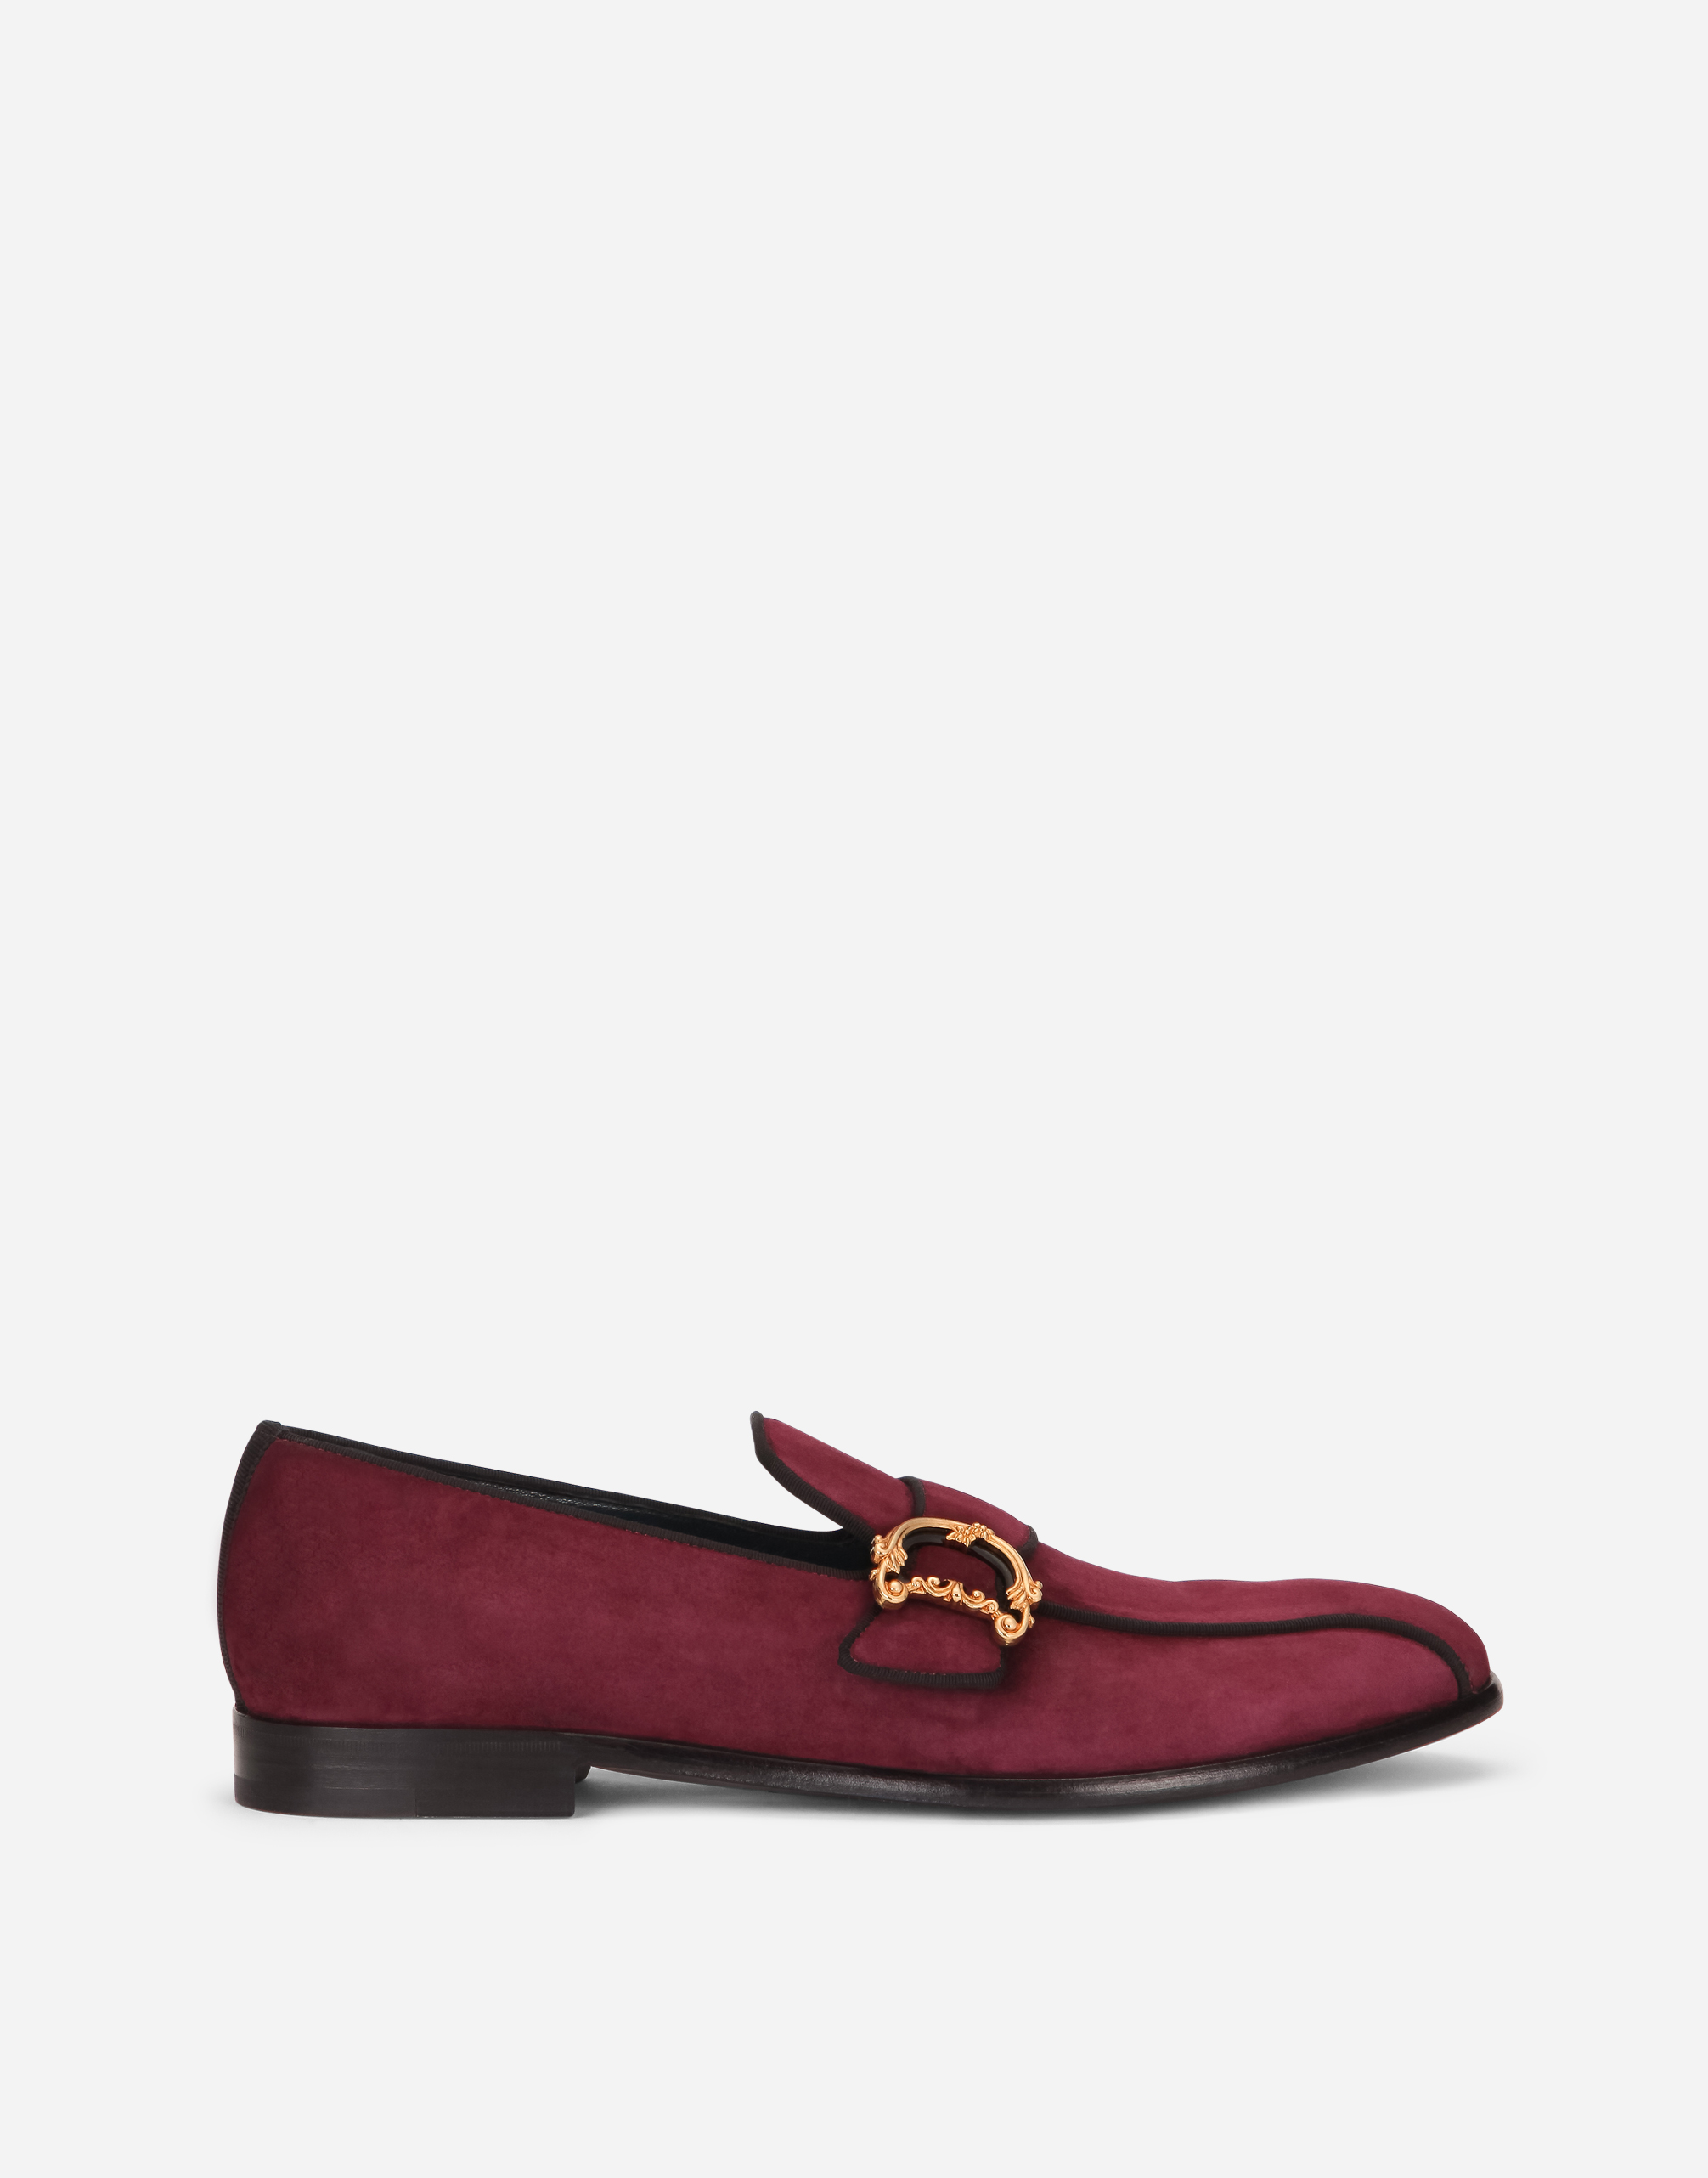 DOLCE & GABBANA SUEDE LOAFERS WITH BAROQUE DG LOGO